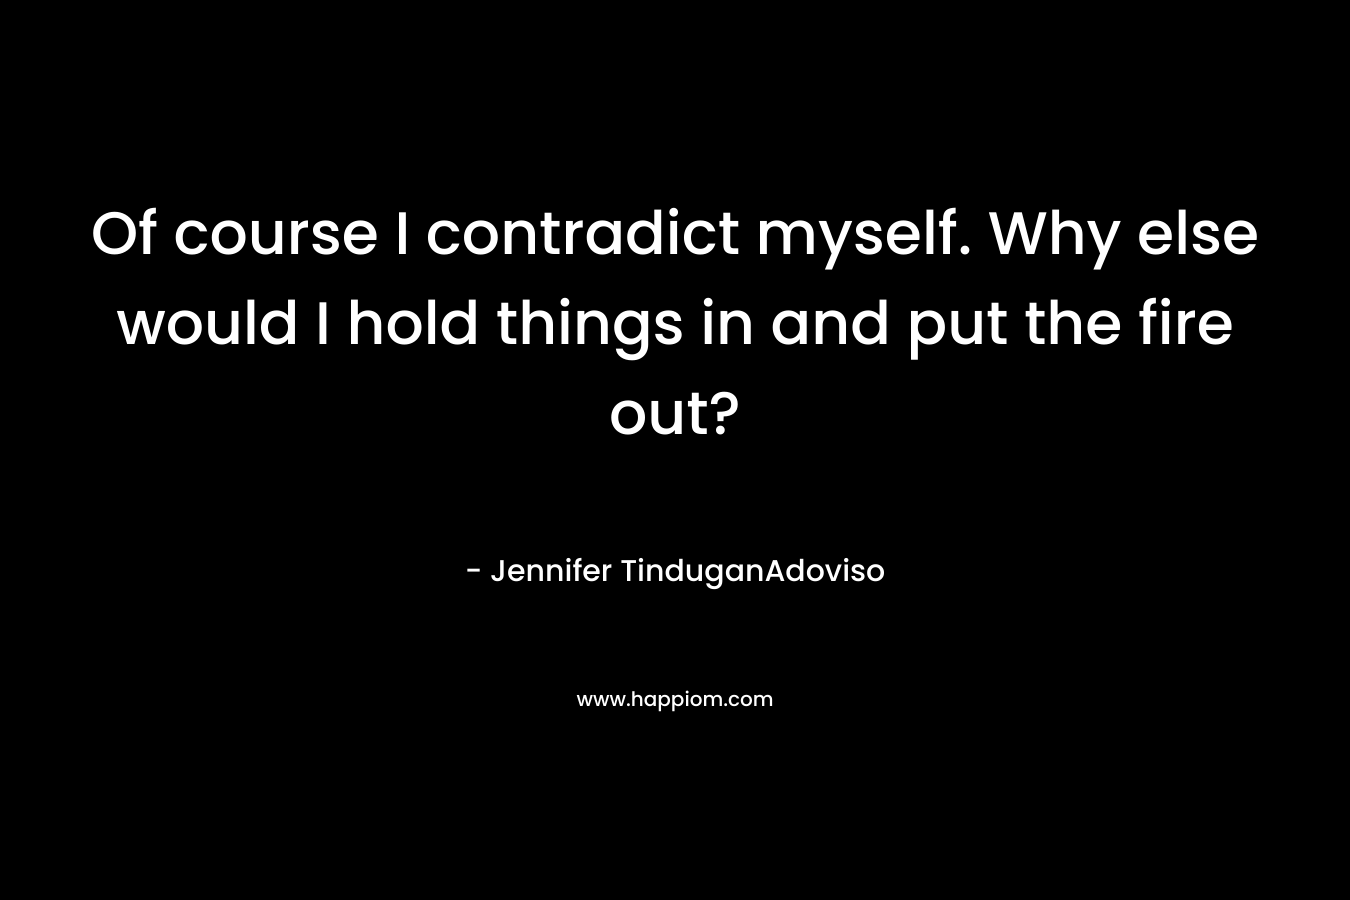 Of course I contradict myself. Why else would I hold things in and put the fire out? – Jennifer TinduganAdoviso